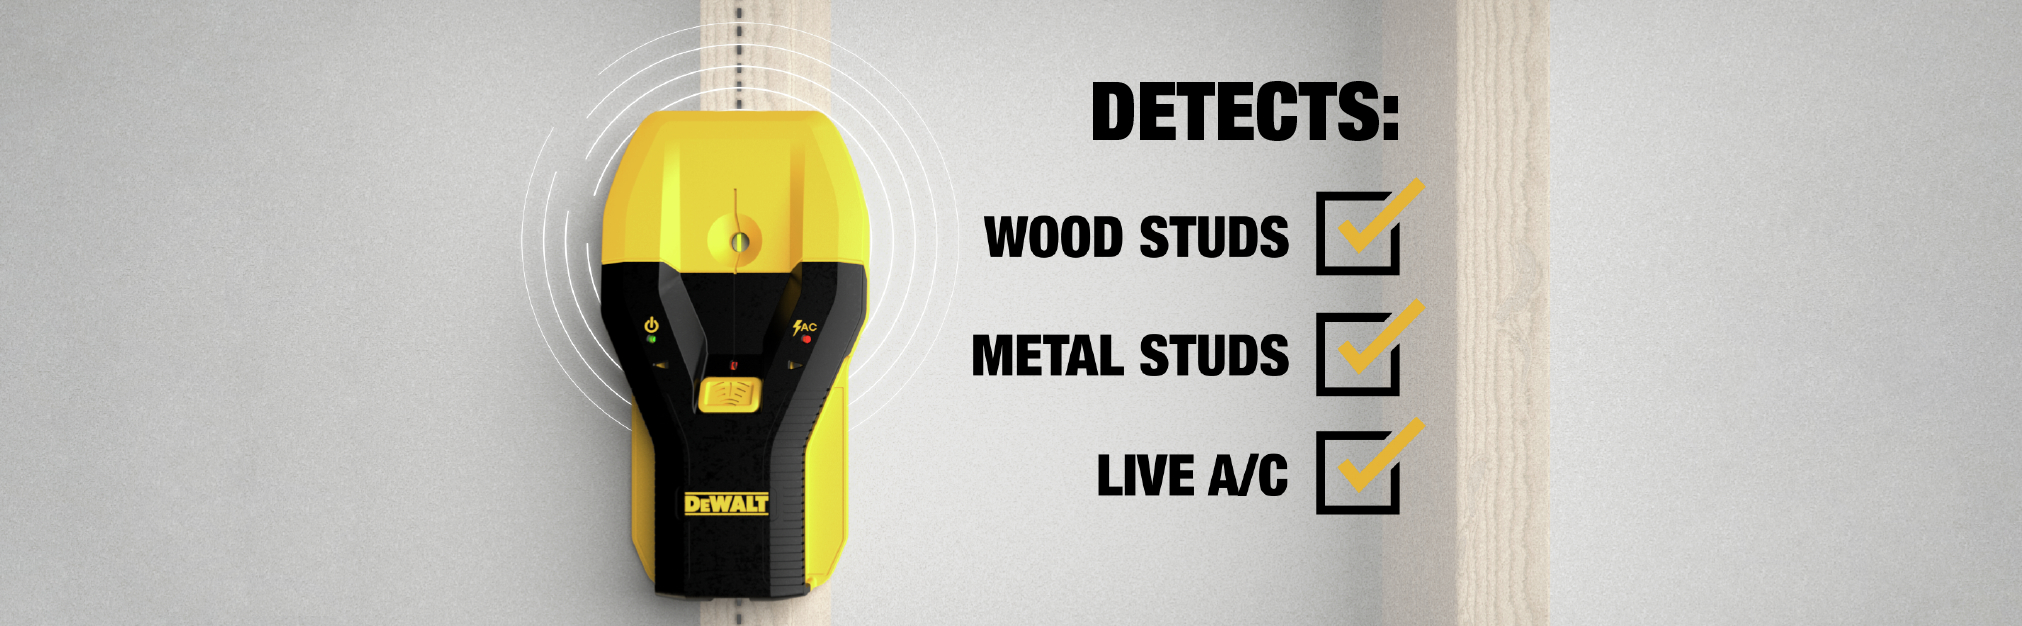 Detects Wood Studs, Metal Studs, and Live A/C